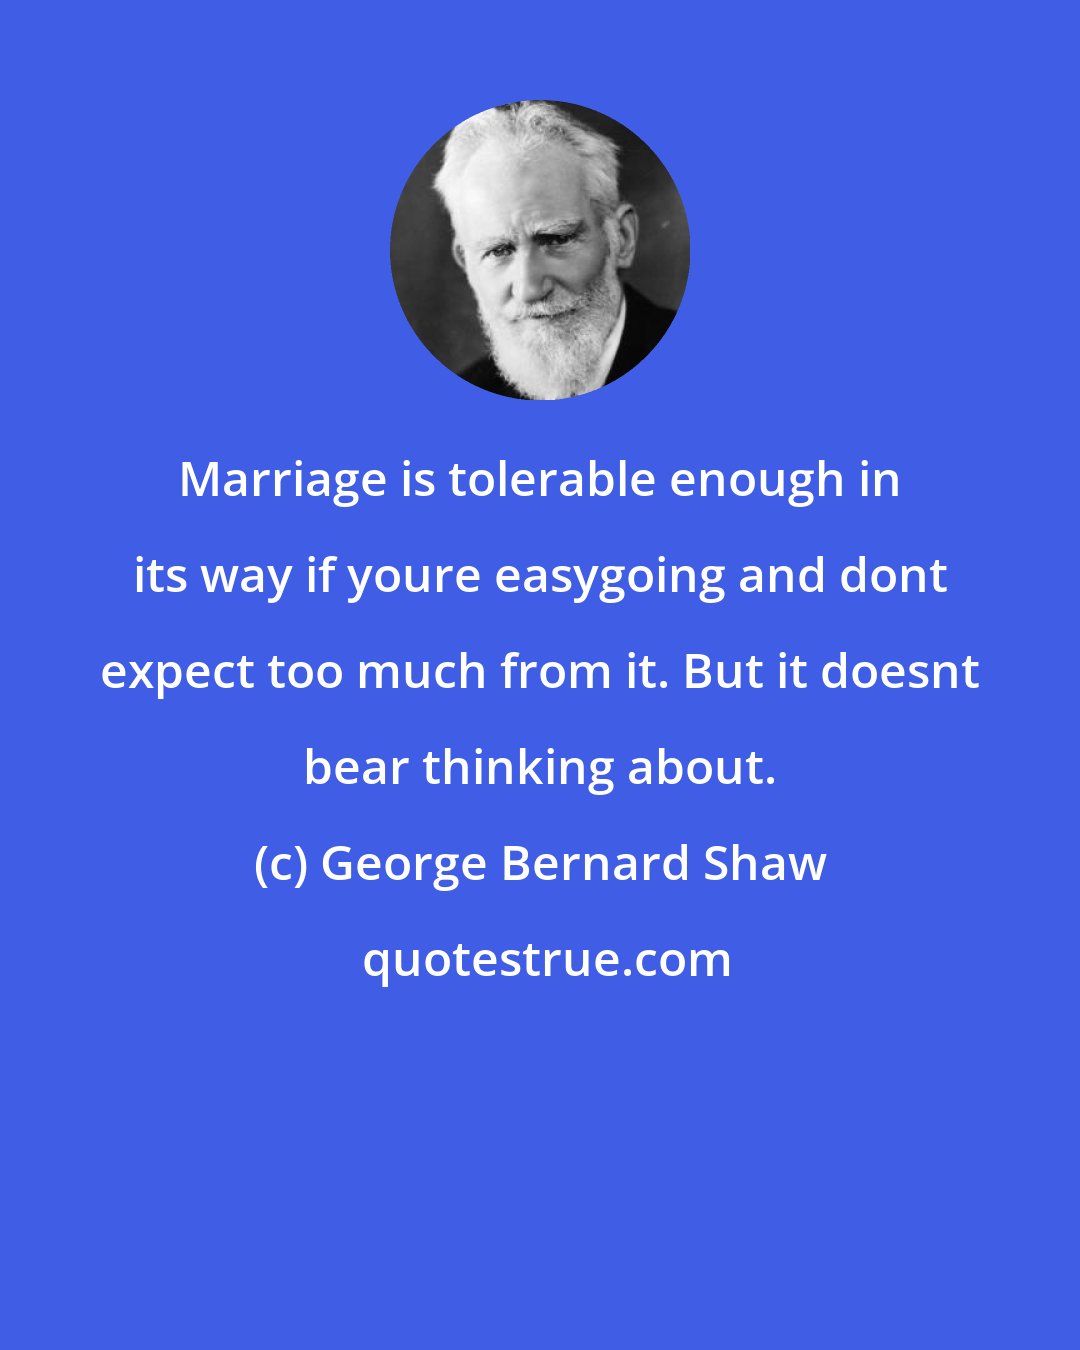 George Bernard Shaw: Marriage is tolerable enough in its way if youre easygoing and dont expect too much from it. But it doesnt bear thinking about.